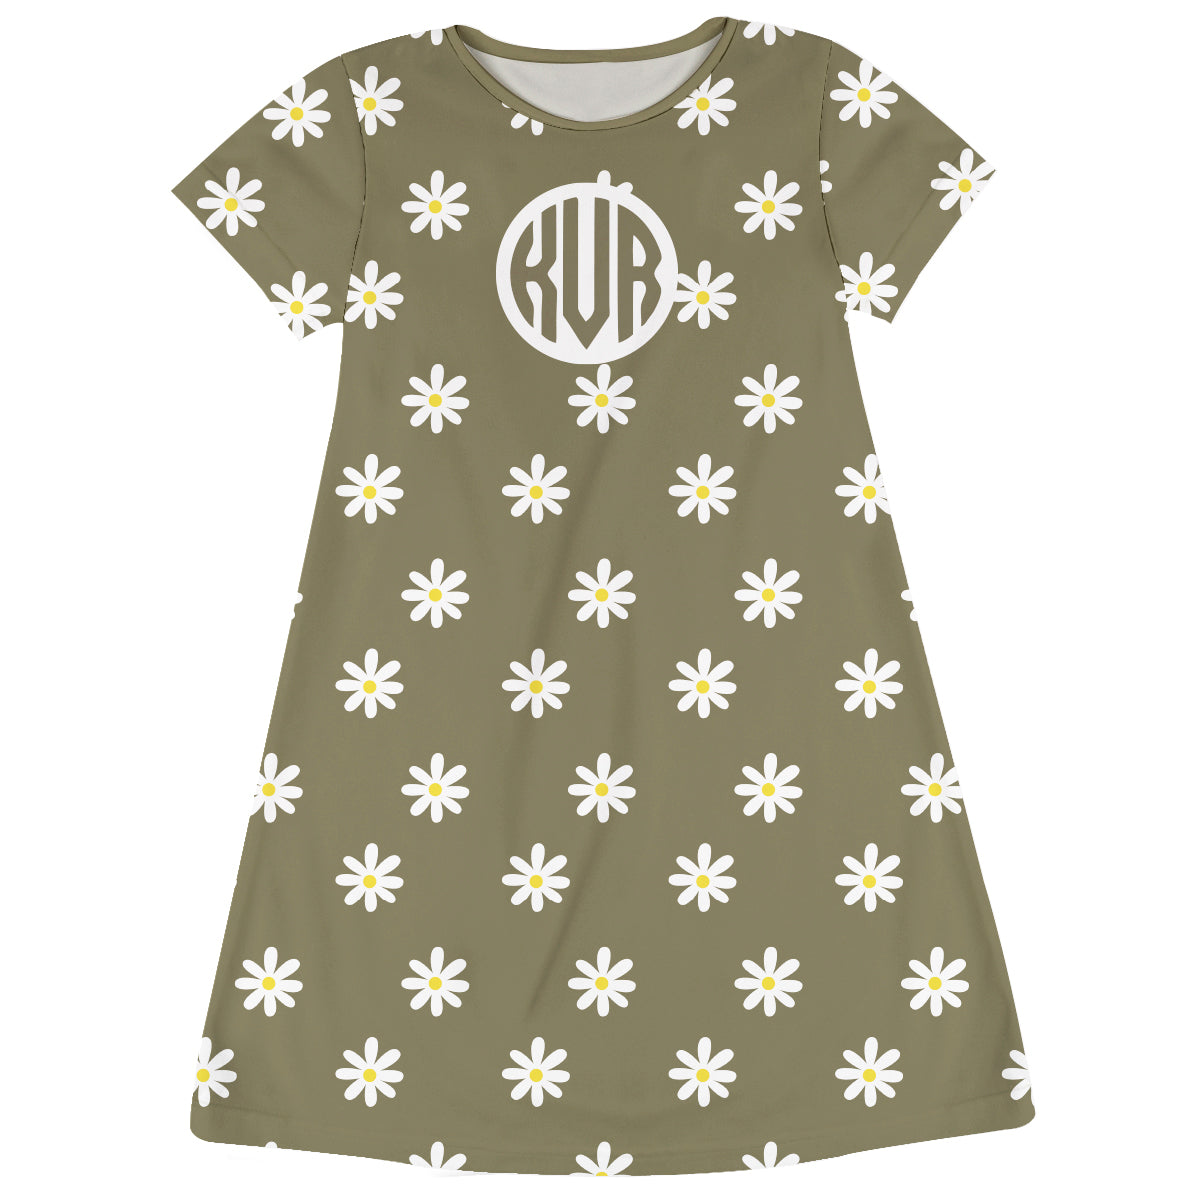 Daisy Flowers Print Personalized Monogram Olive Green Short Sleeve a Line Dress